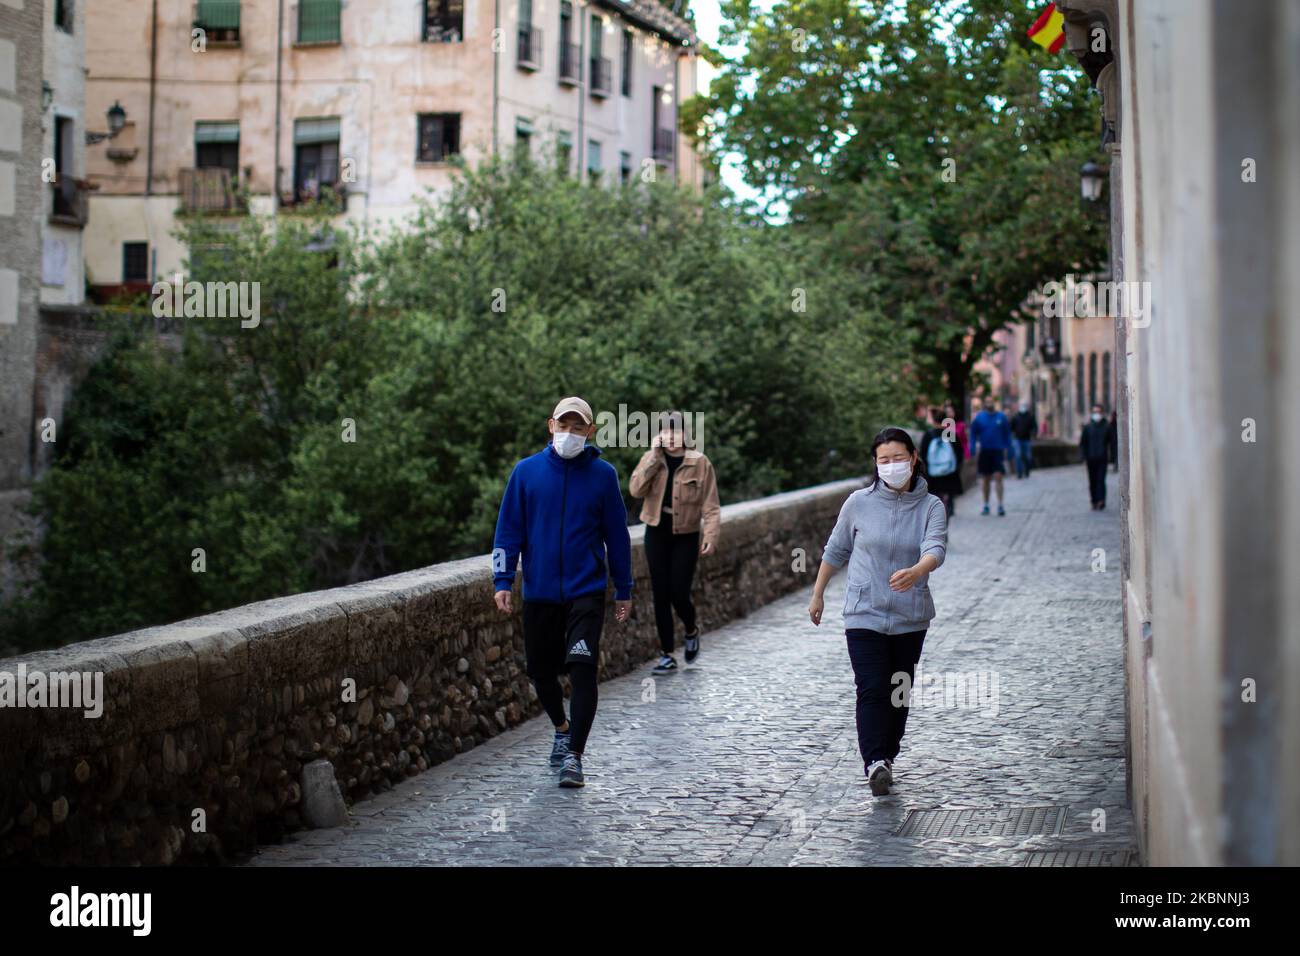 Some people take a walk with face masks on the touristy Carrera del Darro Street on May 12, 2020 in Granada, Spain. Spain is following a plan that consists of four phases, so that people and cities slowly return to normal life. The city of Granada is still in phase 0 until next week due to the decision of the health authorities. (Photo by Fermin Rodriguez/NurPhoto) Stock Photo